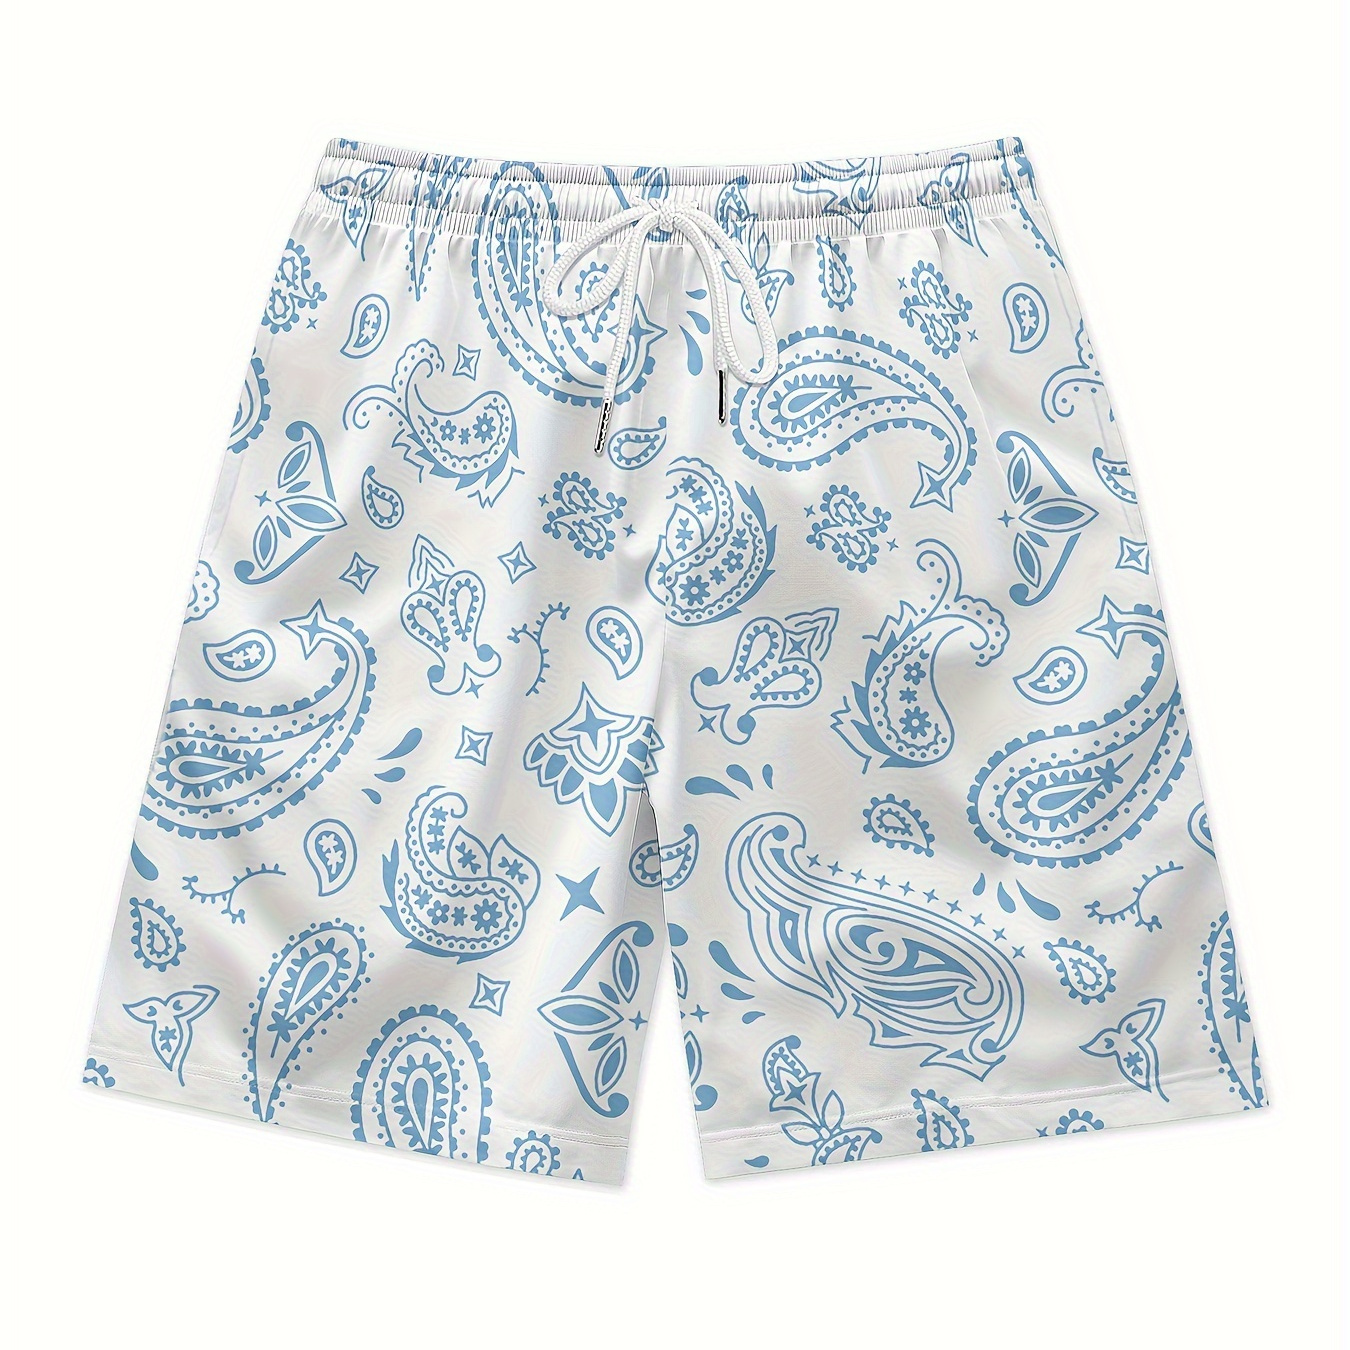 

Blue Paisley Print Men's Drawstring Waist Shorts Quick Dry Breathable Polyester Sport Shorts Daily Streetwear Beach Shorts Casual Clothing Bottoms